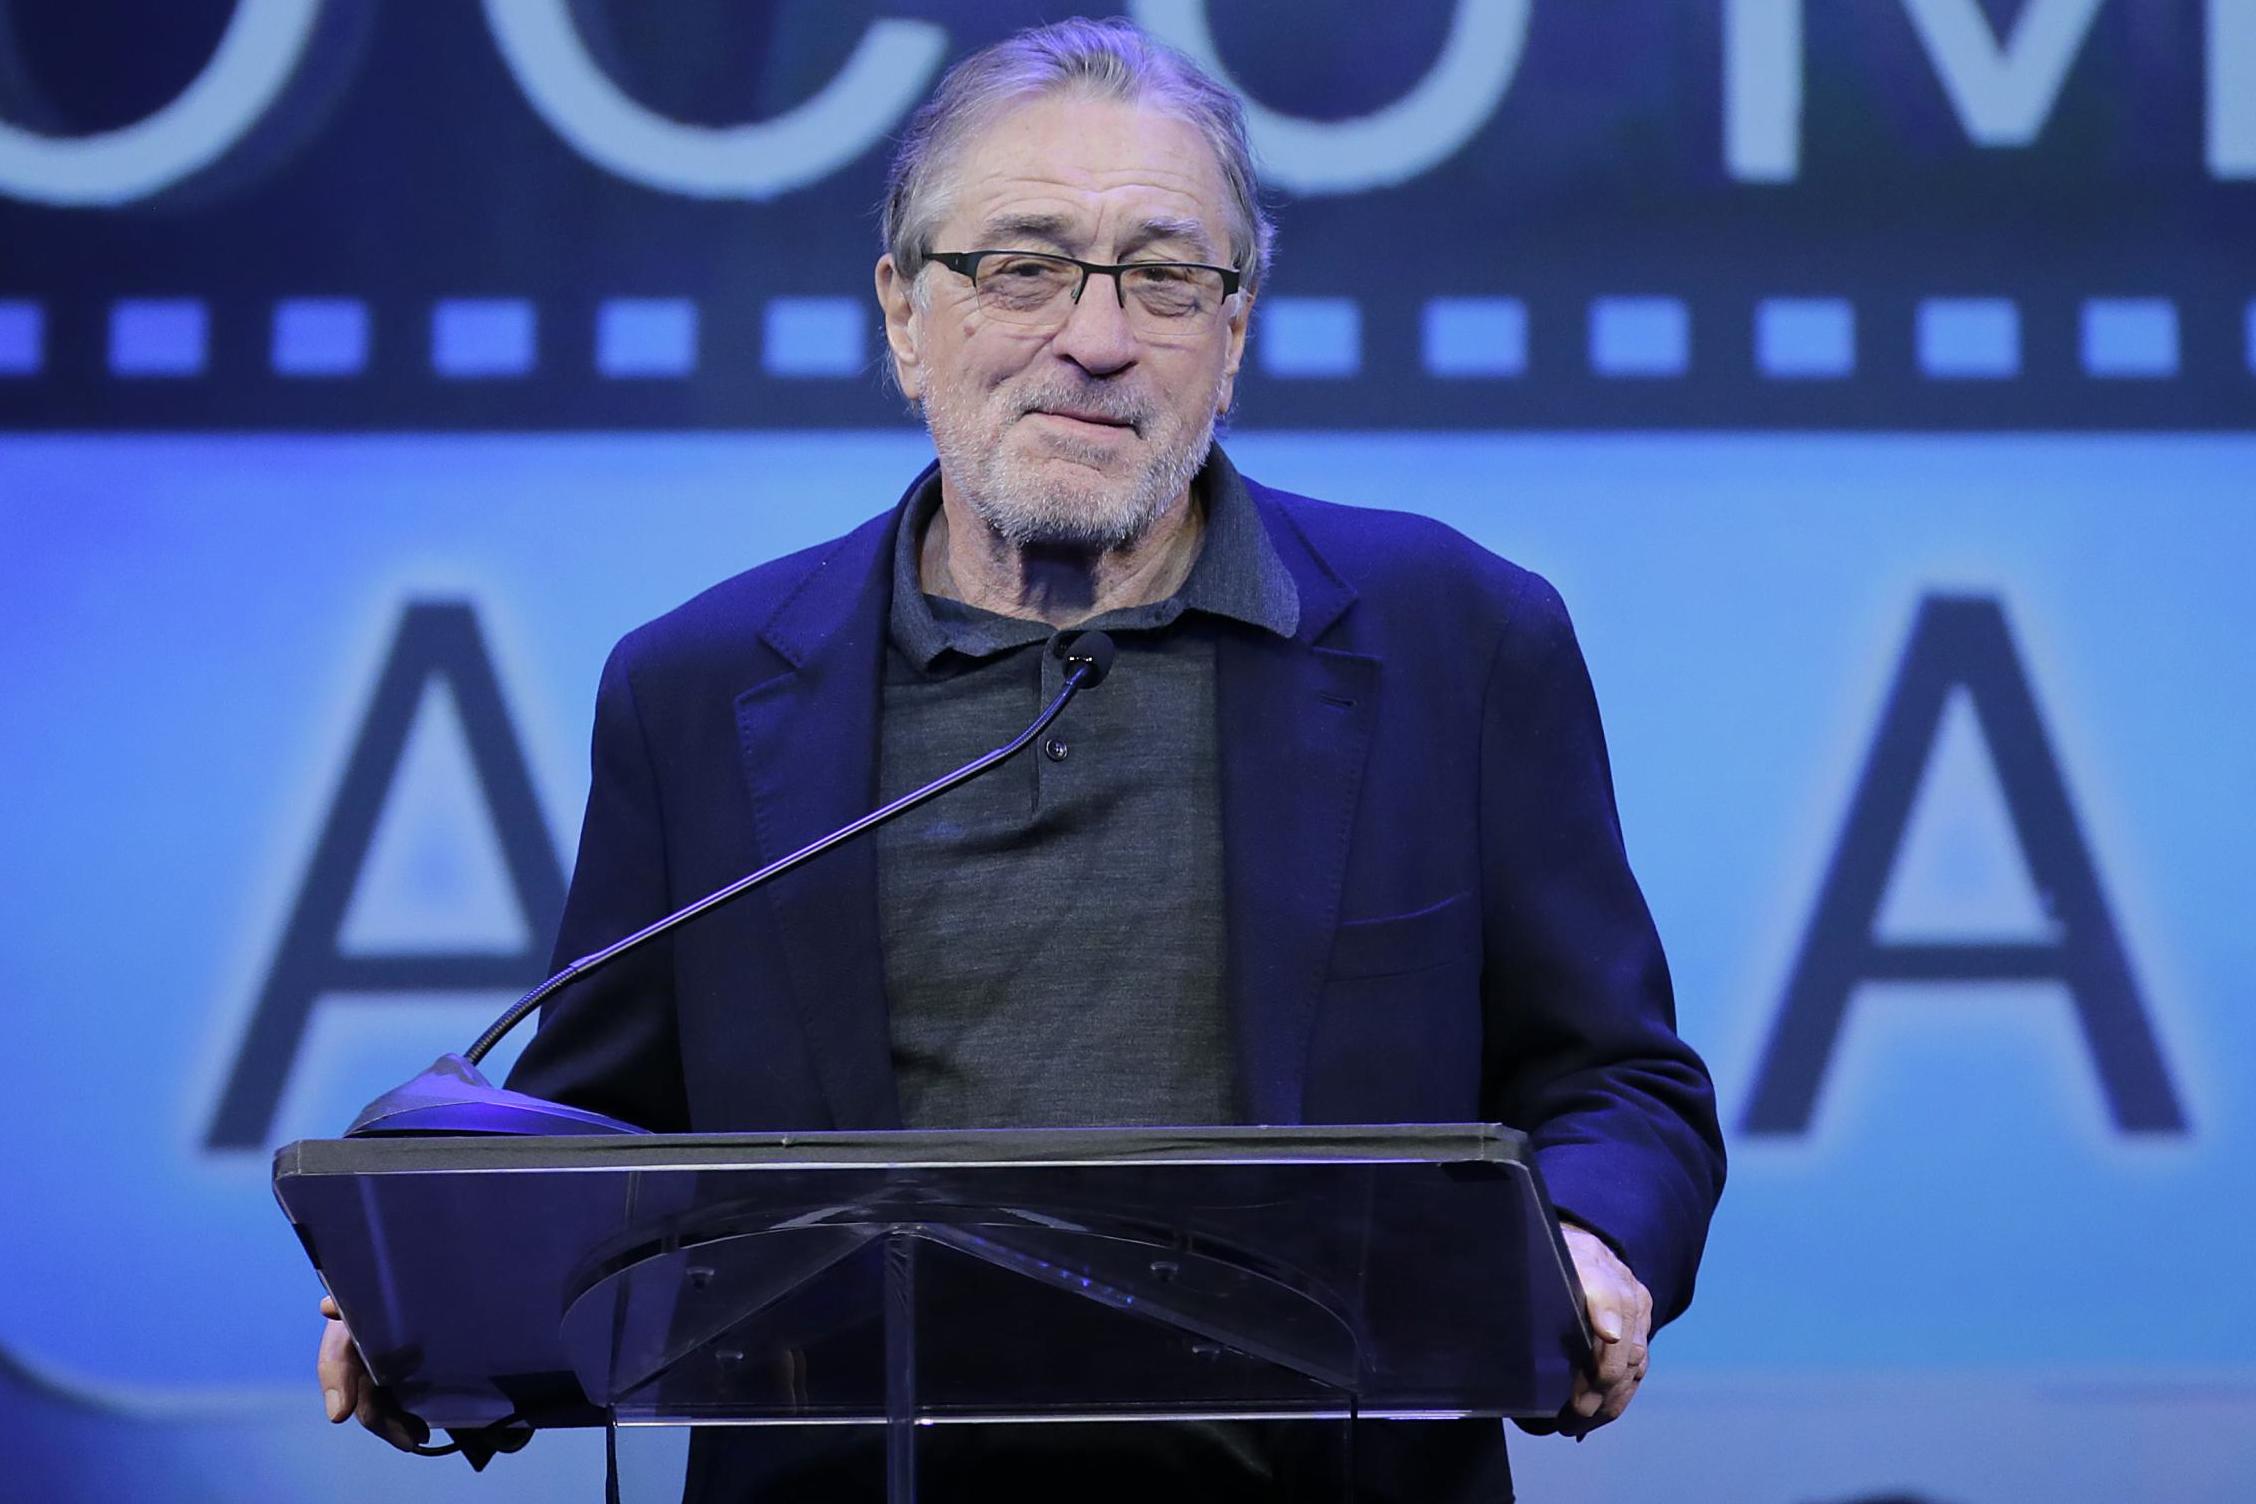 Robert De Niro speaks during the 3rd Annual Critics' Choice Documentary Awards at BRIC on 10 November, 2018 in New York City.